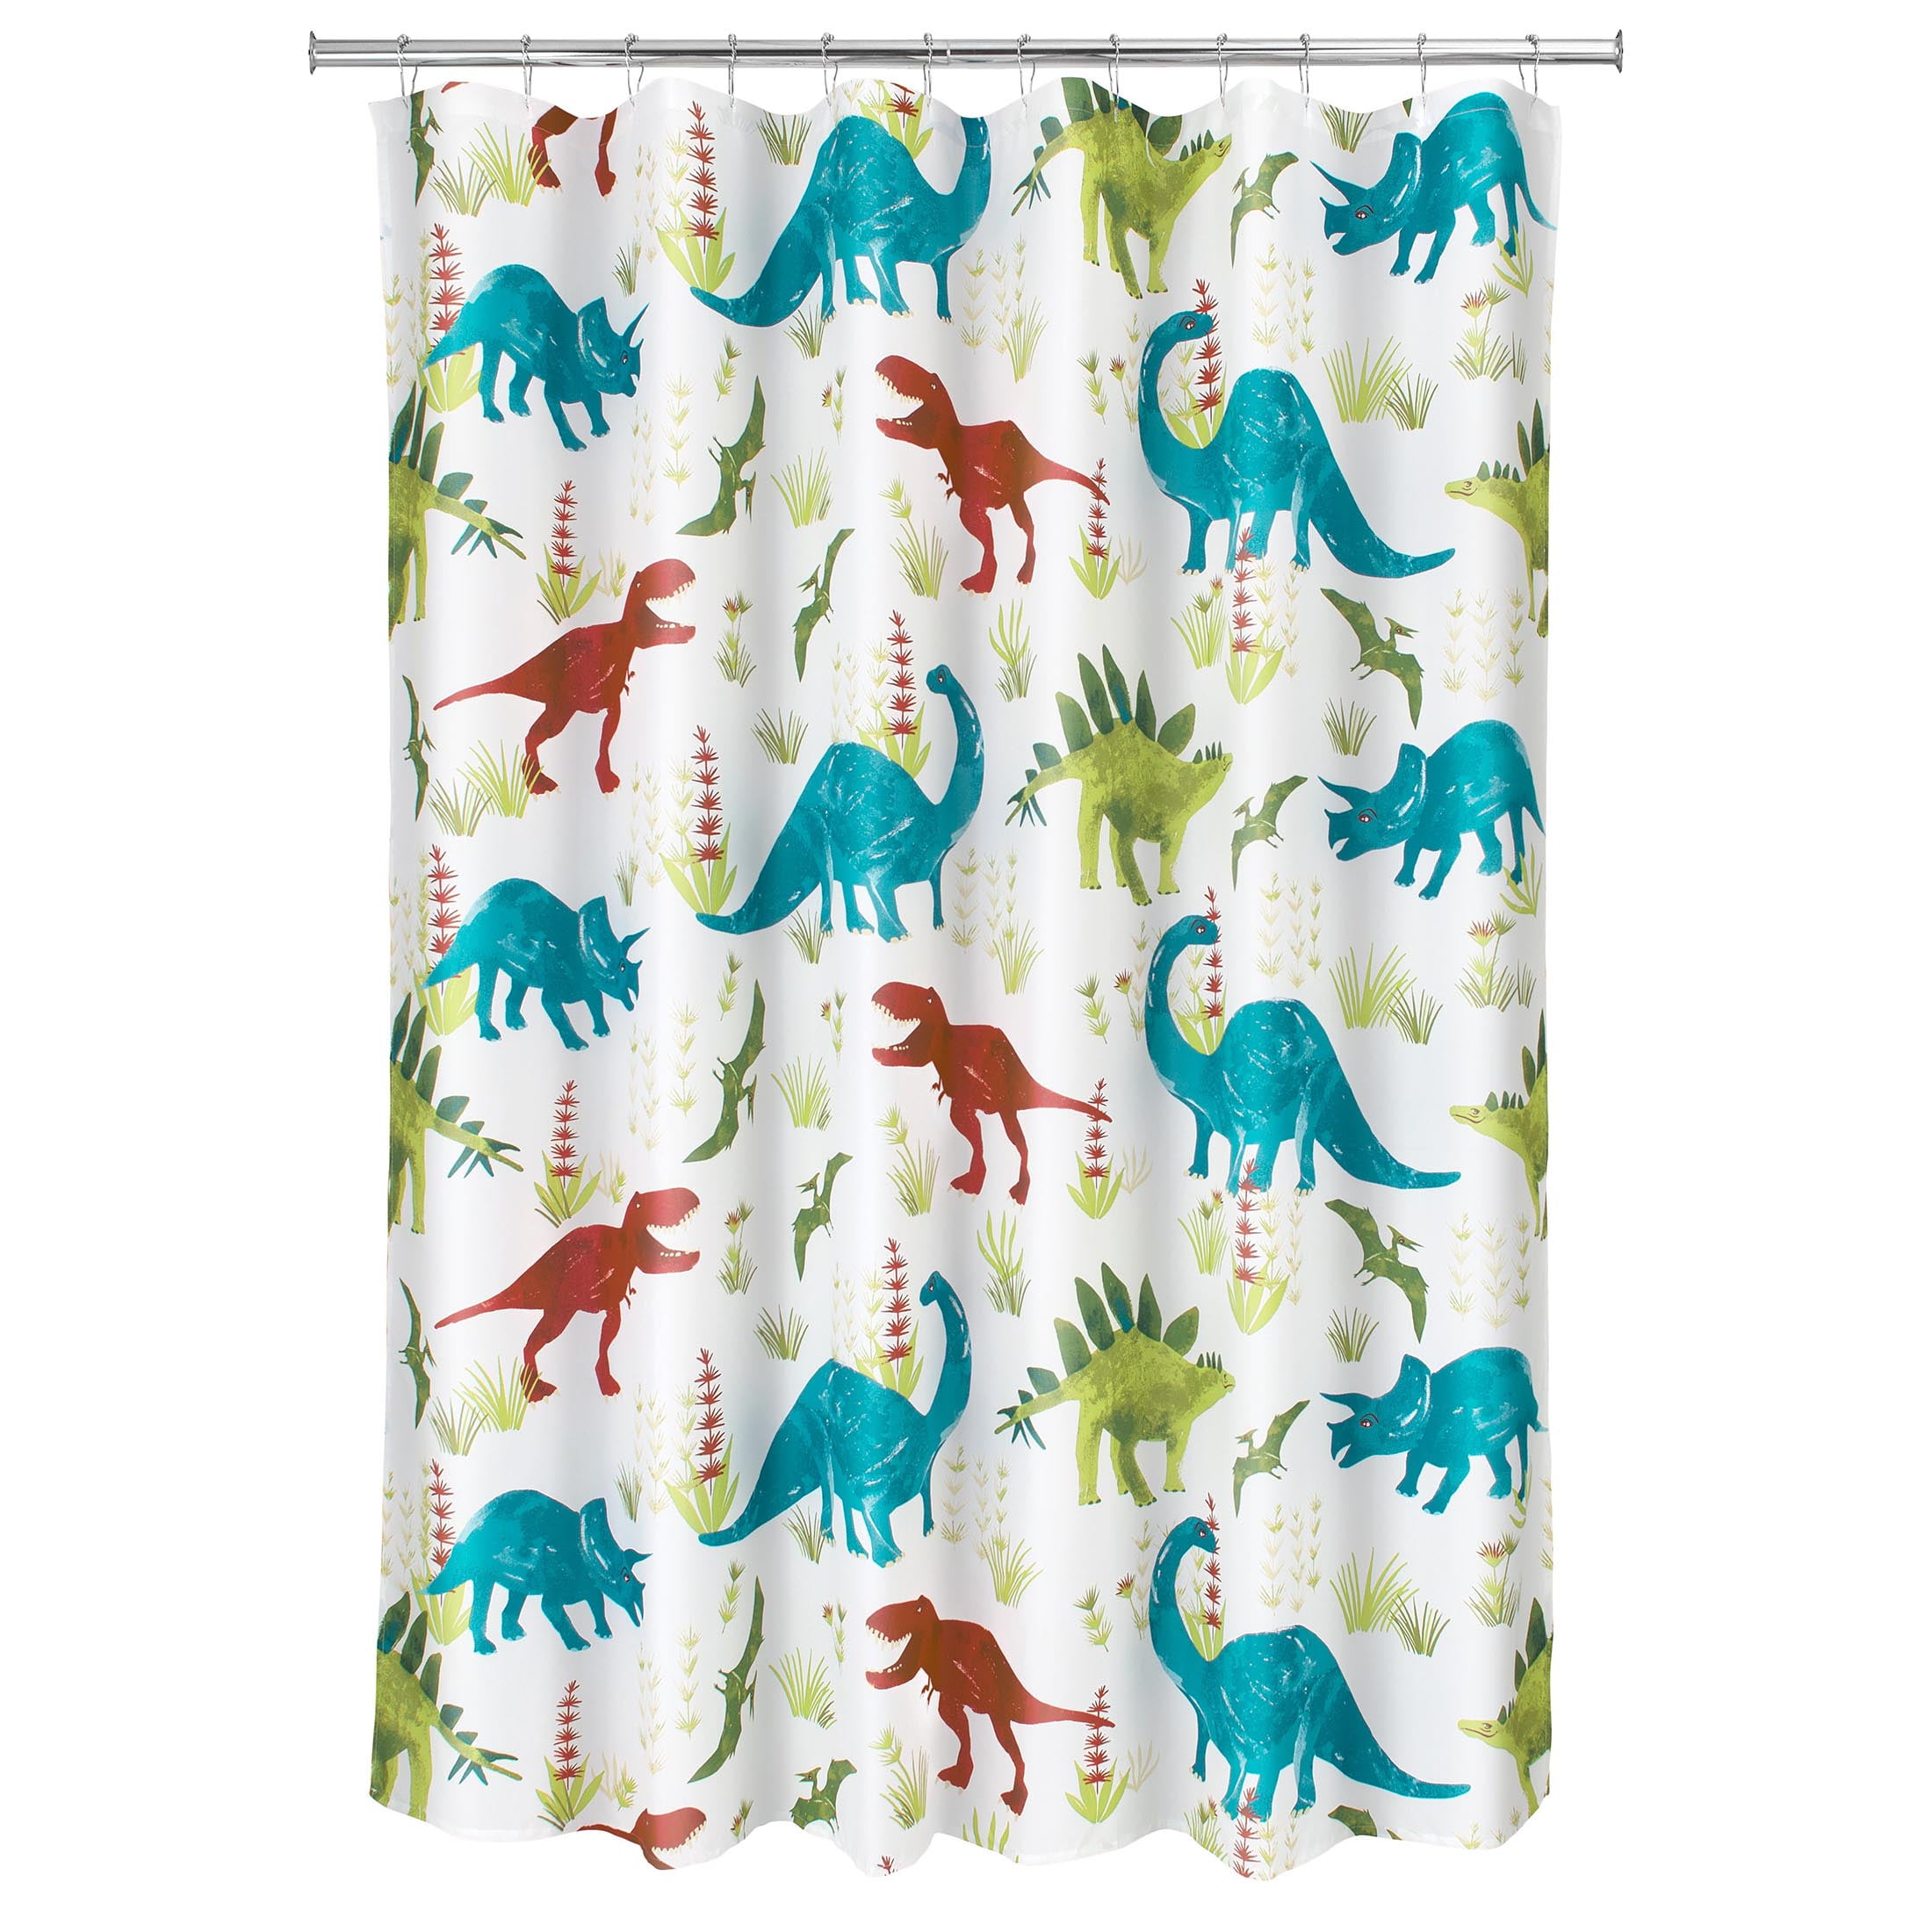 Dino Fabric Shower Curtain by Your Zone, Multi Print, 72" x 72"